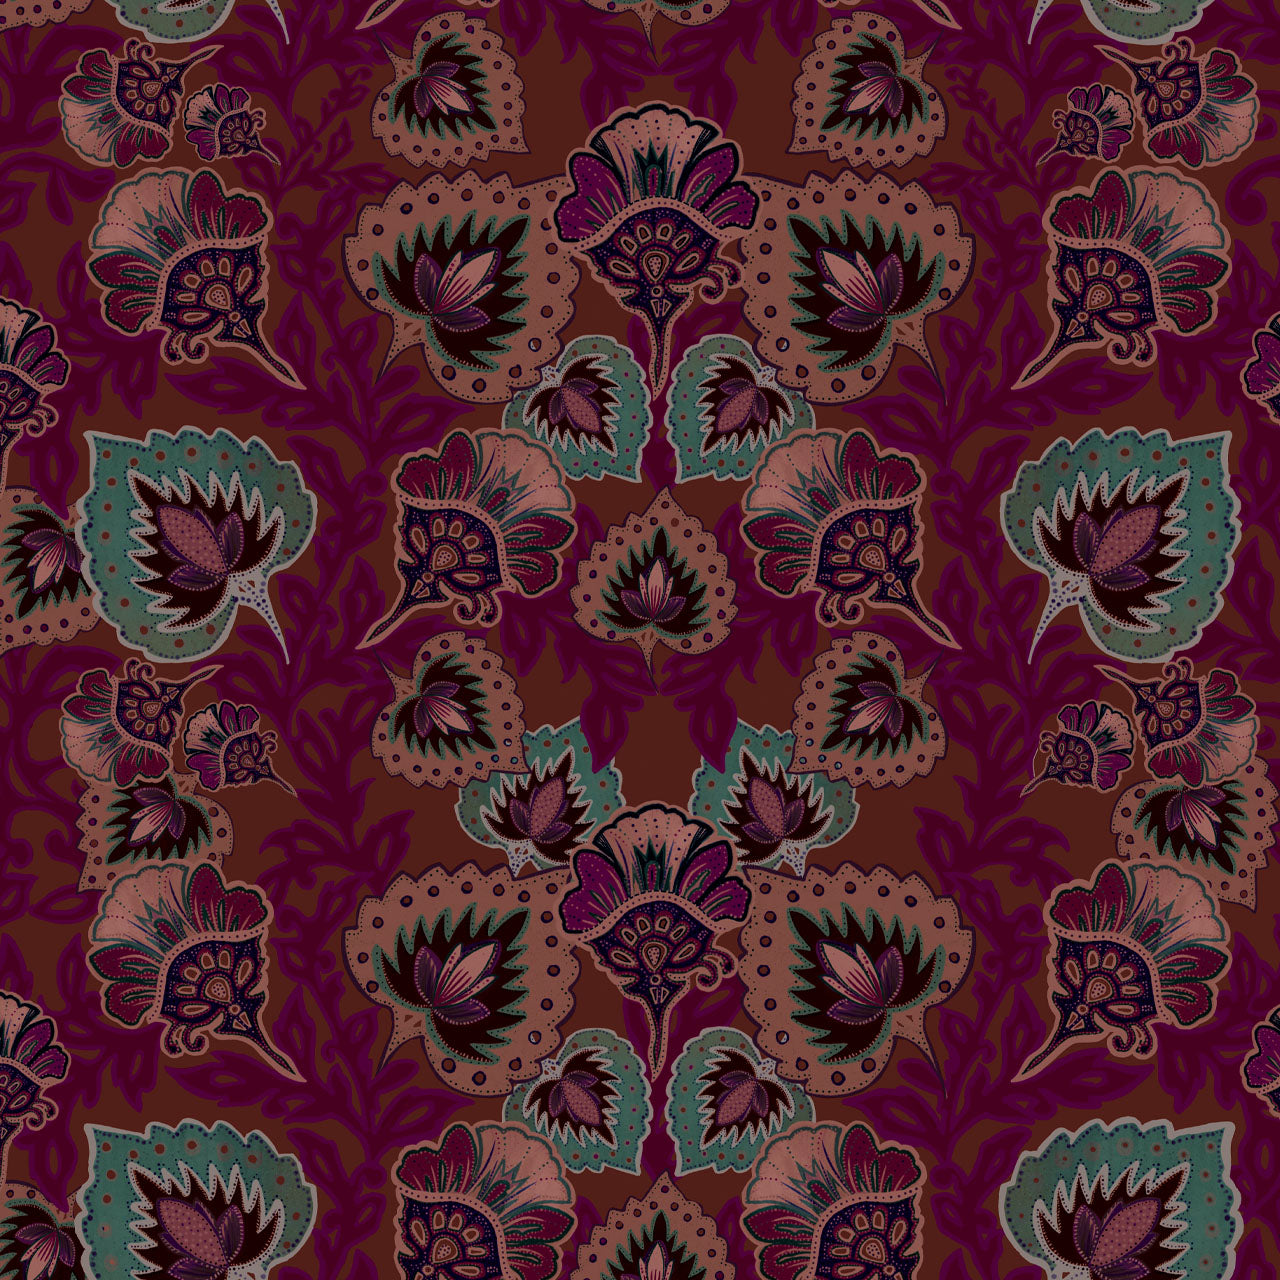 Garden of India Ruby Drum Lampshade